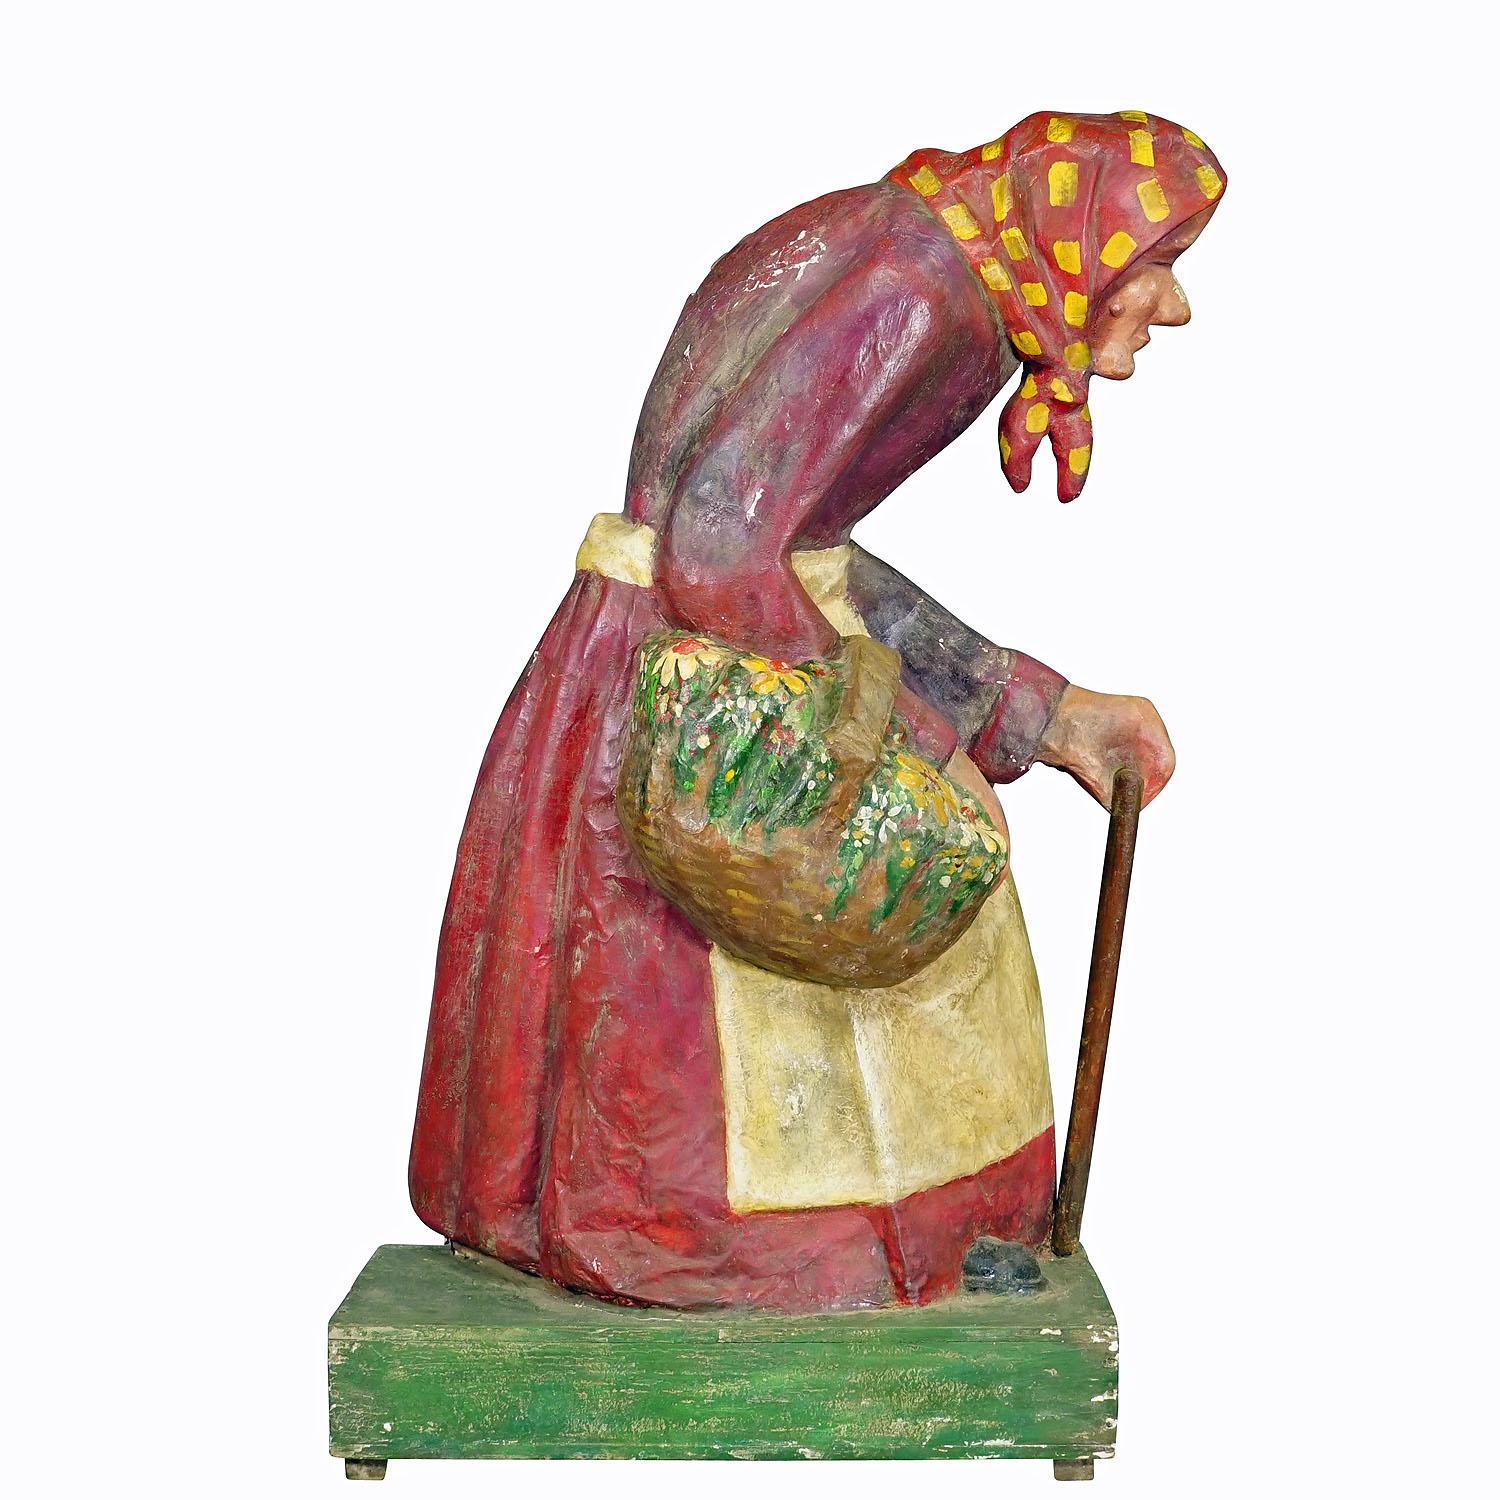 Antique Fairground Paper Mache Sculpture of a Witch or Farmer's Wive

A large half-relief sculpture of the witch from the fairy tale Hansel and Gretel. Probably used as decoration in a fairytale garden at a funfair. Handmade from papier-mâché on a